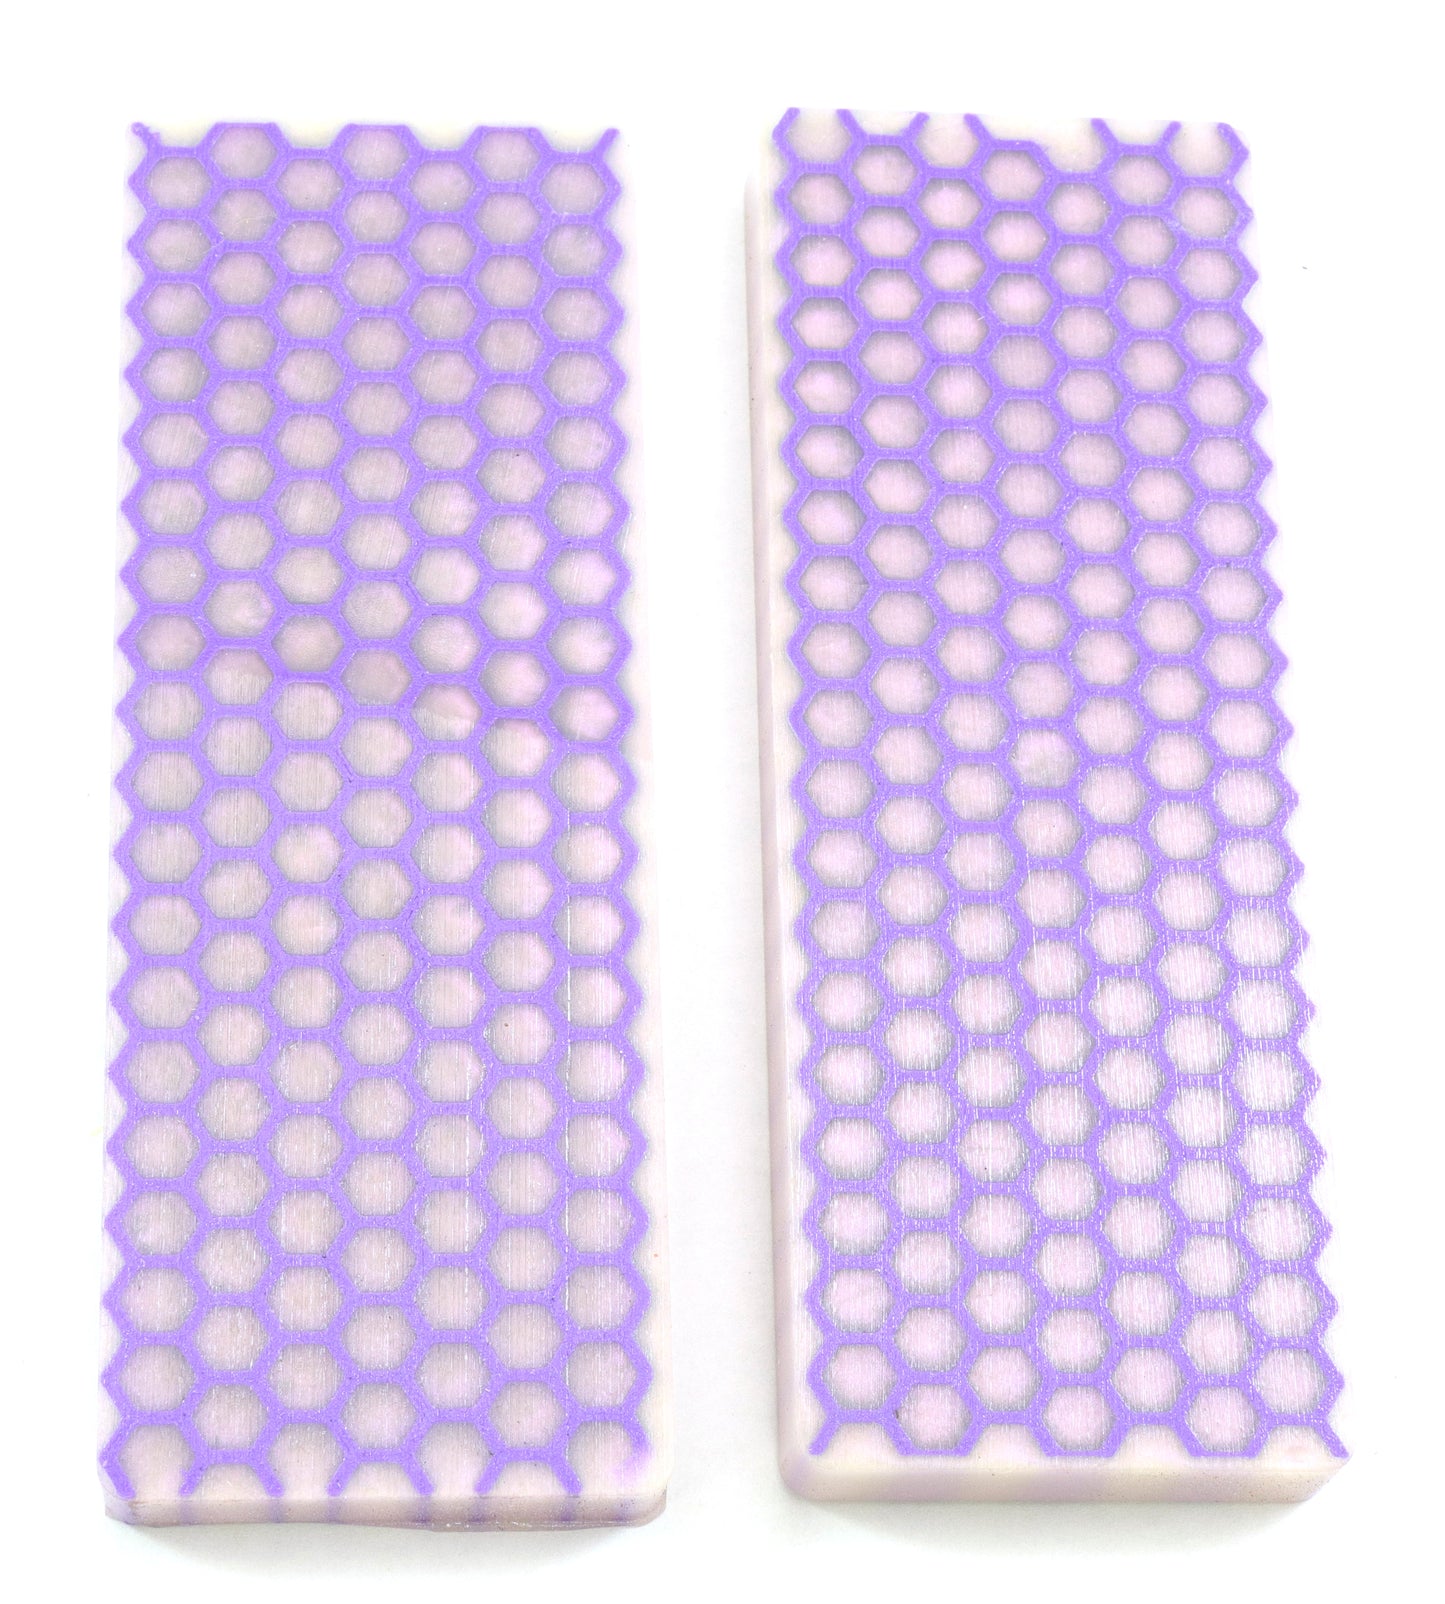 Honeycomb Knife Scale Blanks